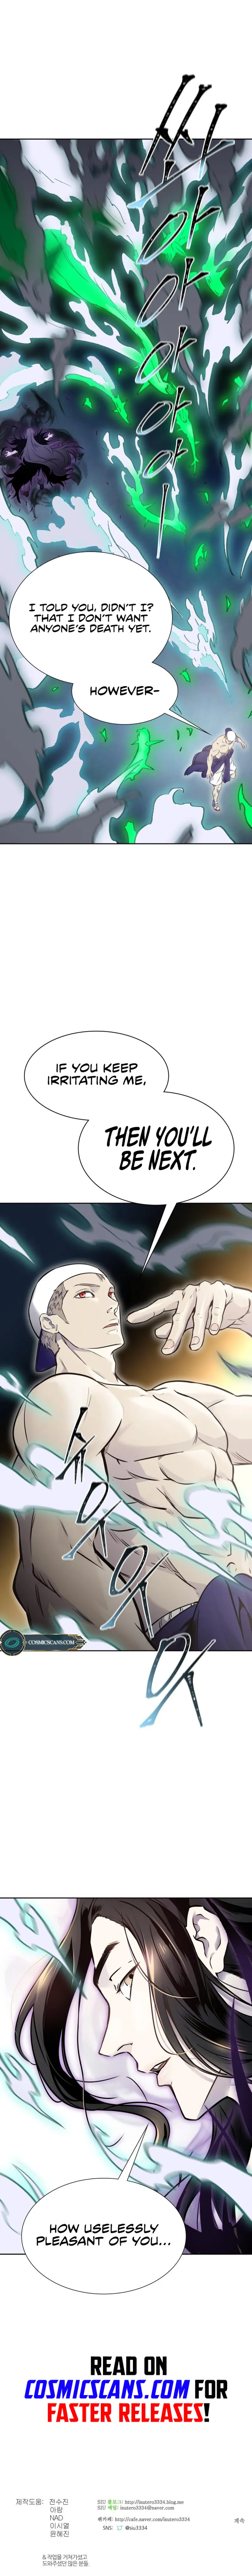 Tower of god chapter 599